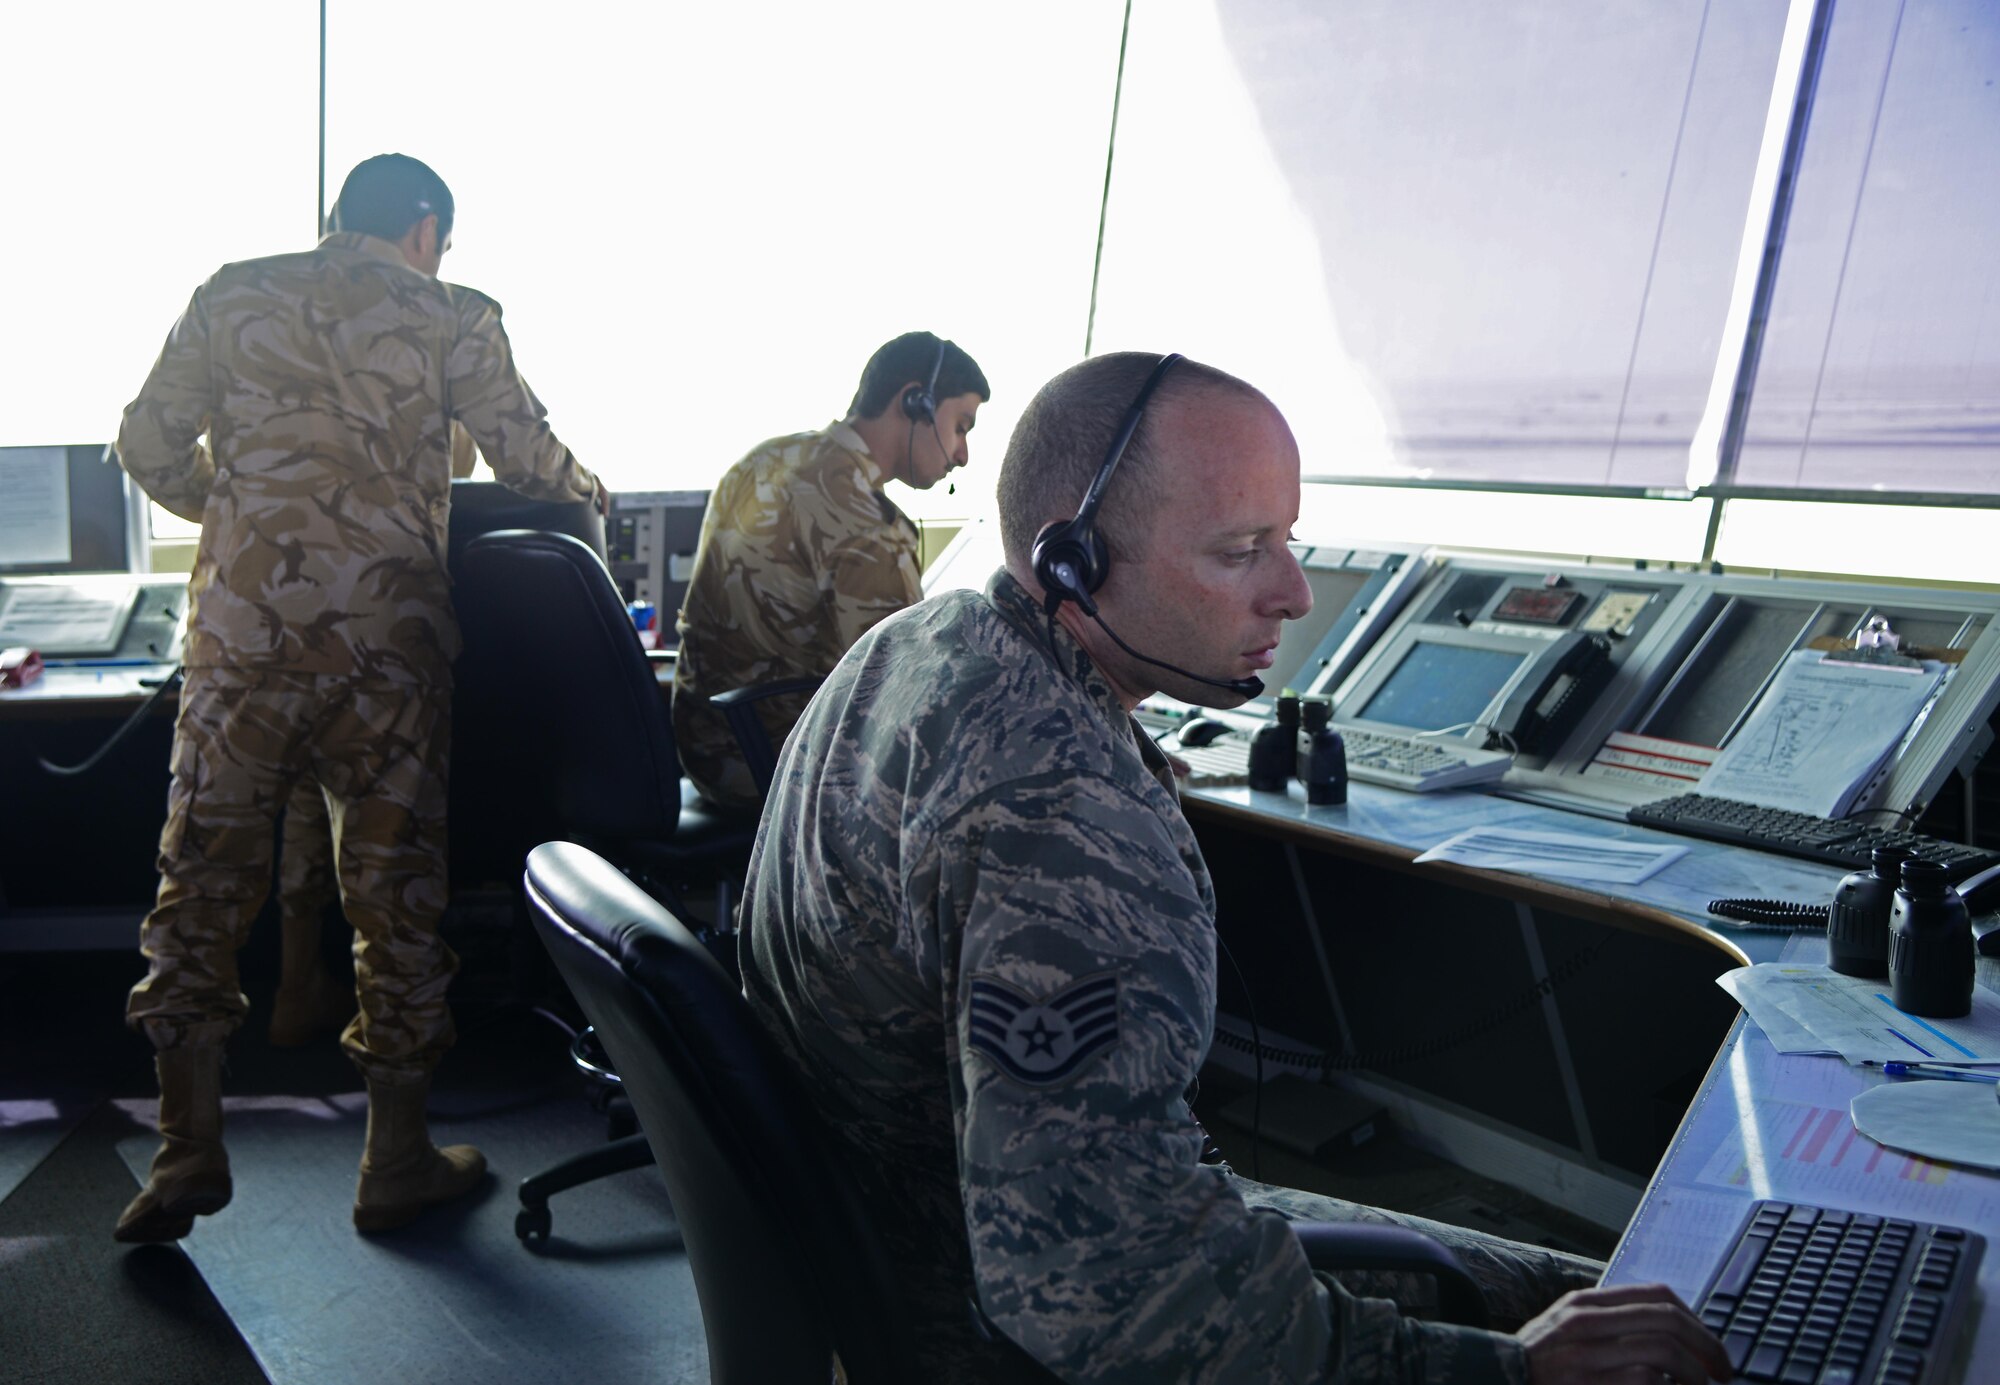 U.S. Air Force and Qatar Emiri Air Force air traffic controllers maintain surveillance of the airfield  from the air traffic control tower, Feb. 17, 2015, at Al Udeid Air Base, Qatar. U.S. and Qatari air traffic controllers provide 24-hour operations directing aircraft in flight and on the flightline at the busiest airfield in the U.S. Air Forces Central Command's area of responsibility. (U.S. Air Force photo by Senior Airman Kia Atkins)